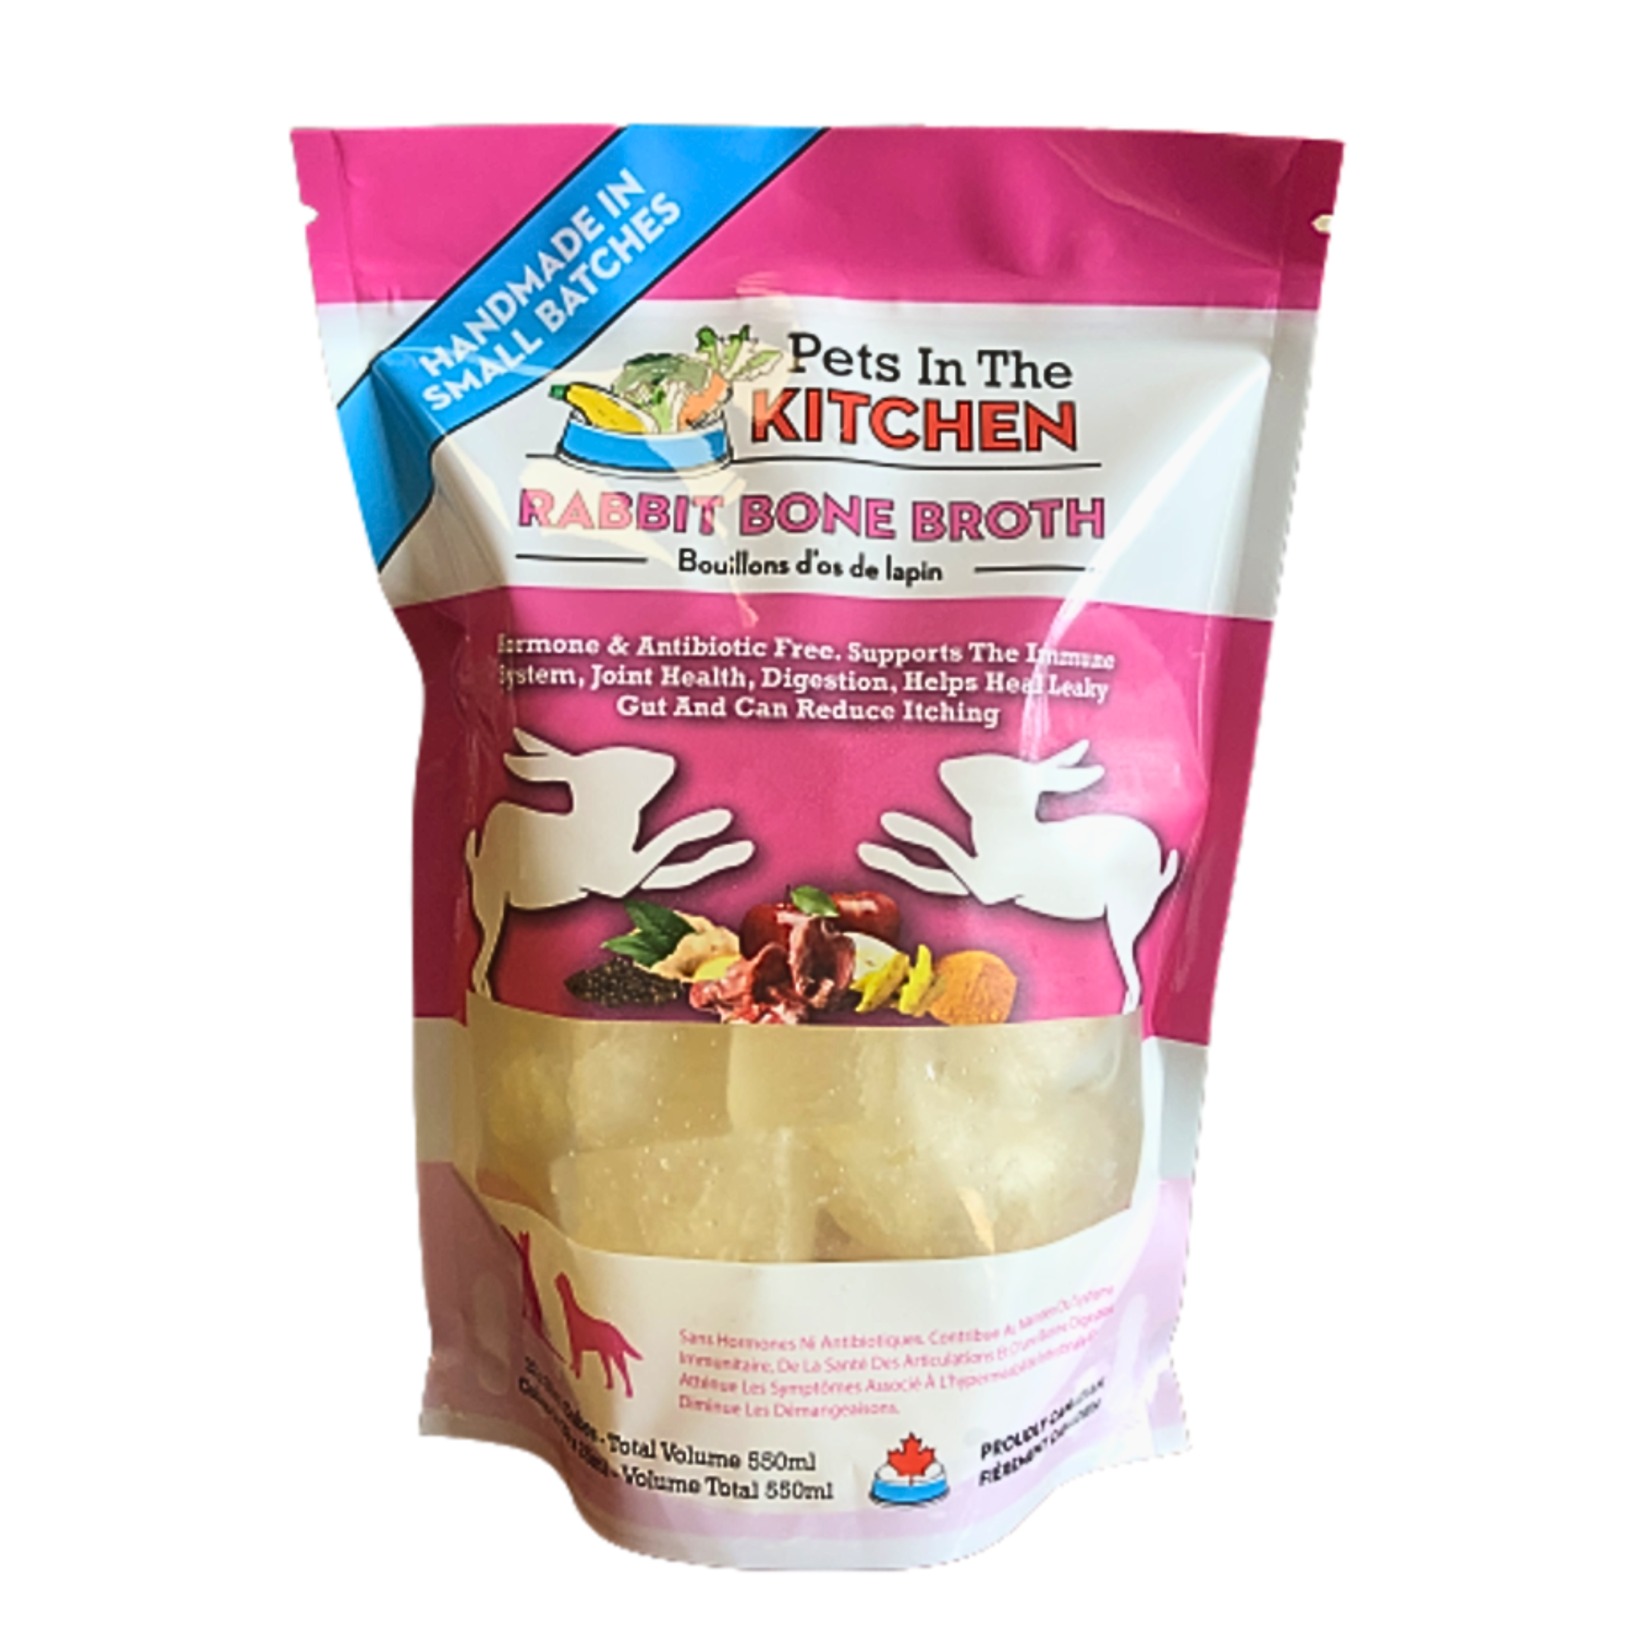 Pets In The Kitchen Pets In The Kitchen: Rabbit Bone Broth 550mL